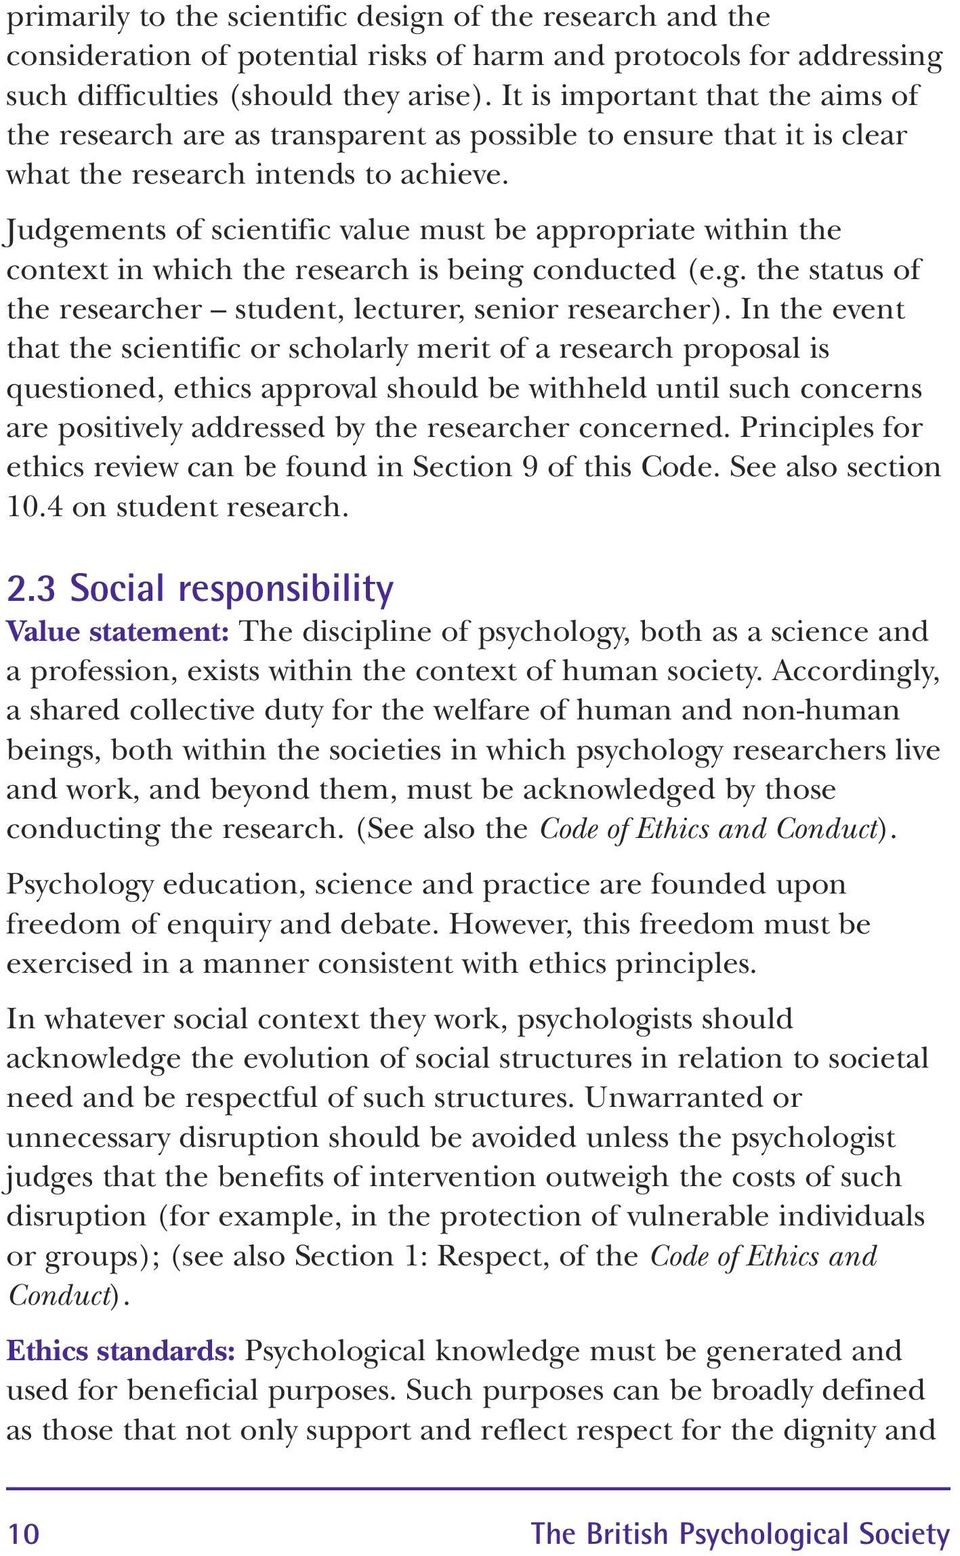 Judgements of scientific value must be appropriate within the context in which the research is being conducted (e.g. the status of the researcher student, lecturer, senior researcher).